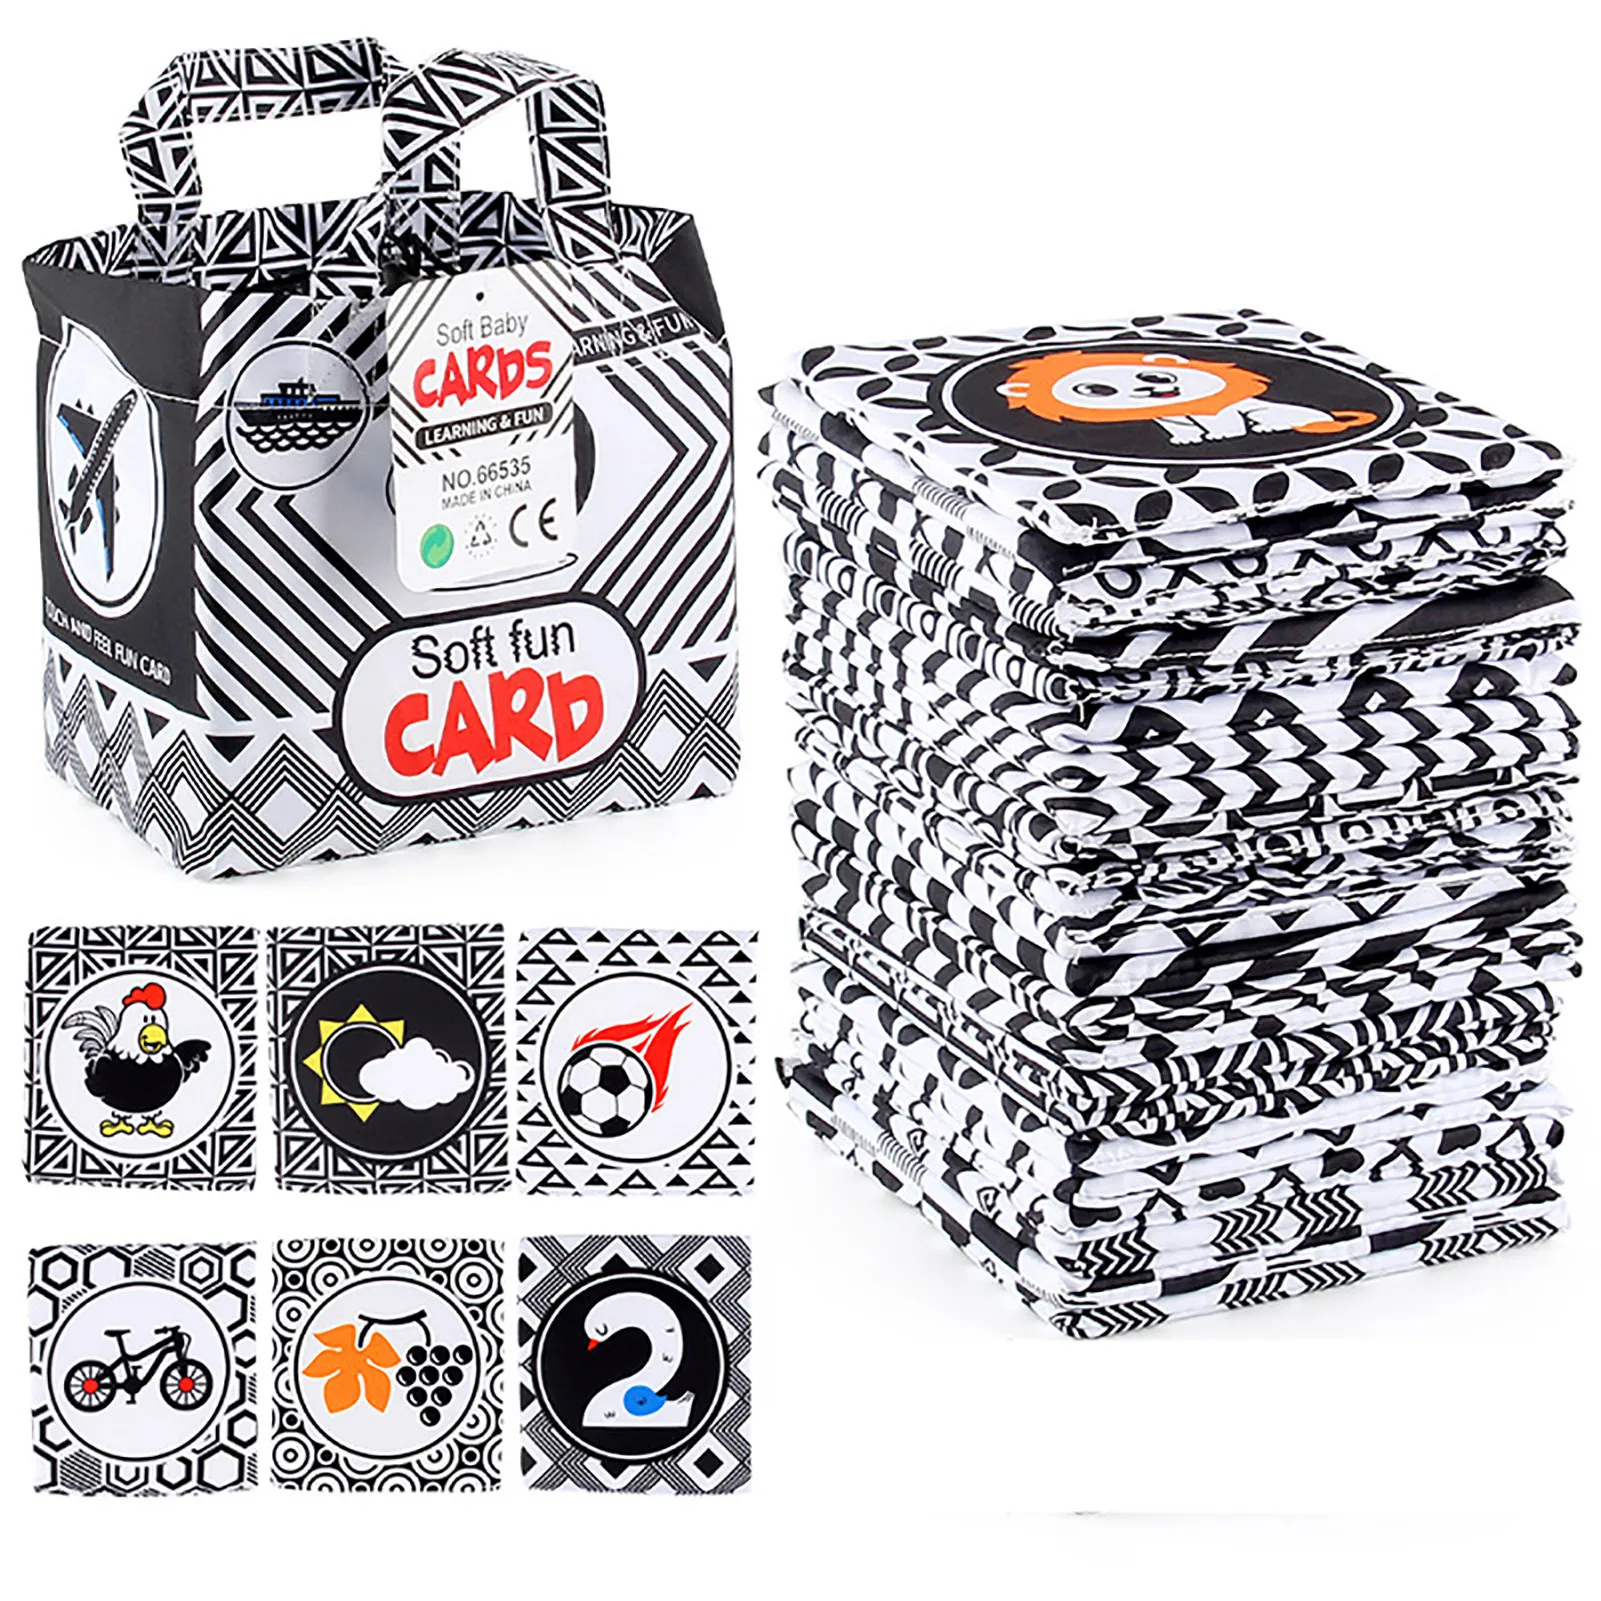 

Soft Fruit Cards With Cloth Storage Bag Black White Soft Flash Cards For Babies Infants Early Educational Toys For 0-6 Months